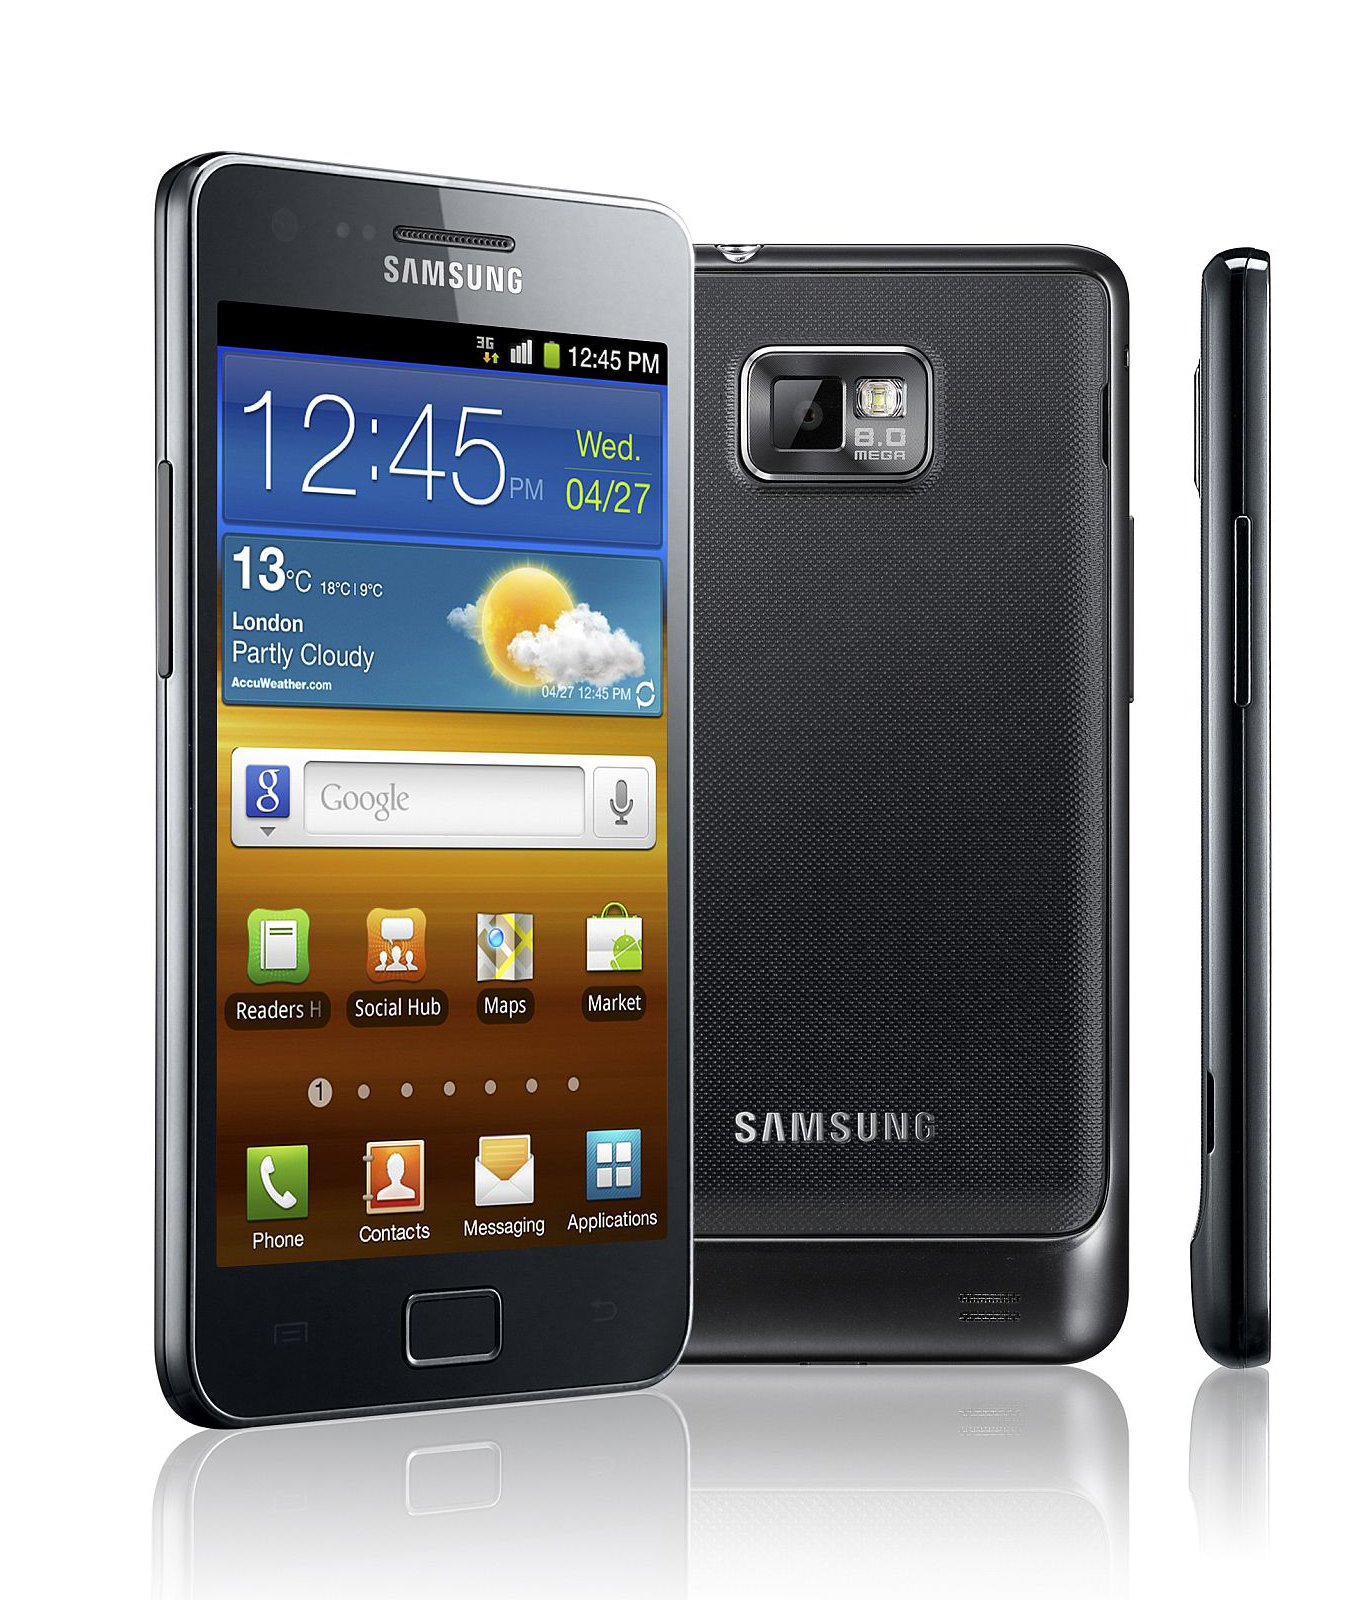 Samsung Galaxy S2 specs, review, release date - PhonesData